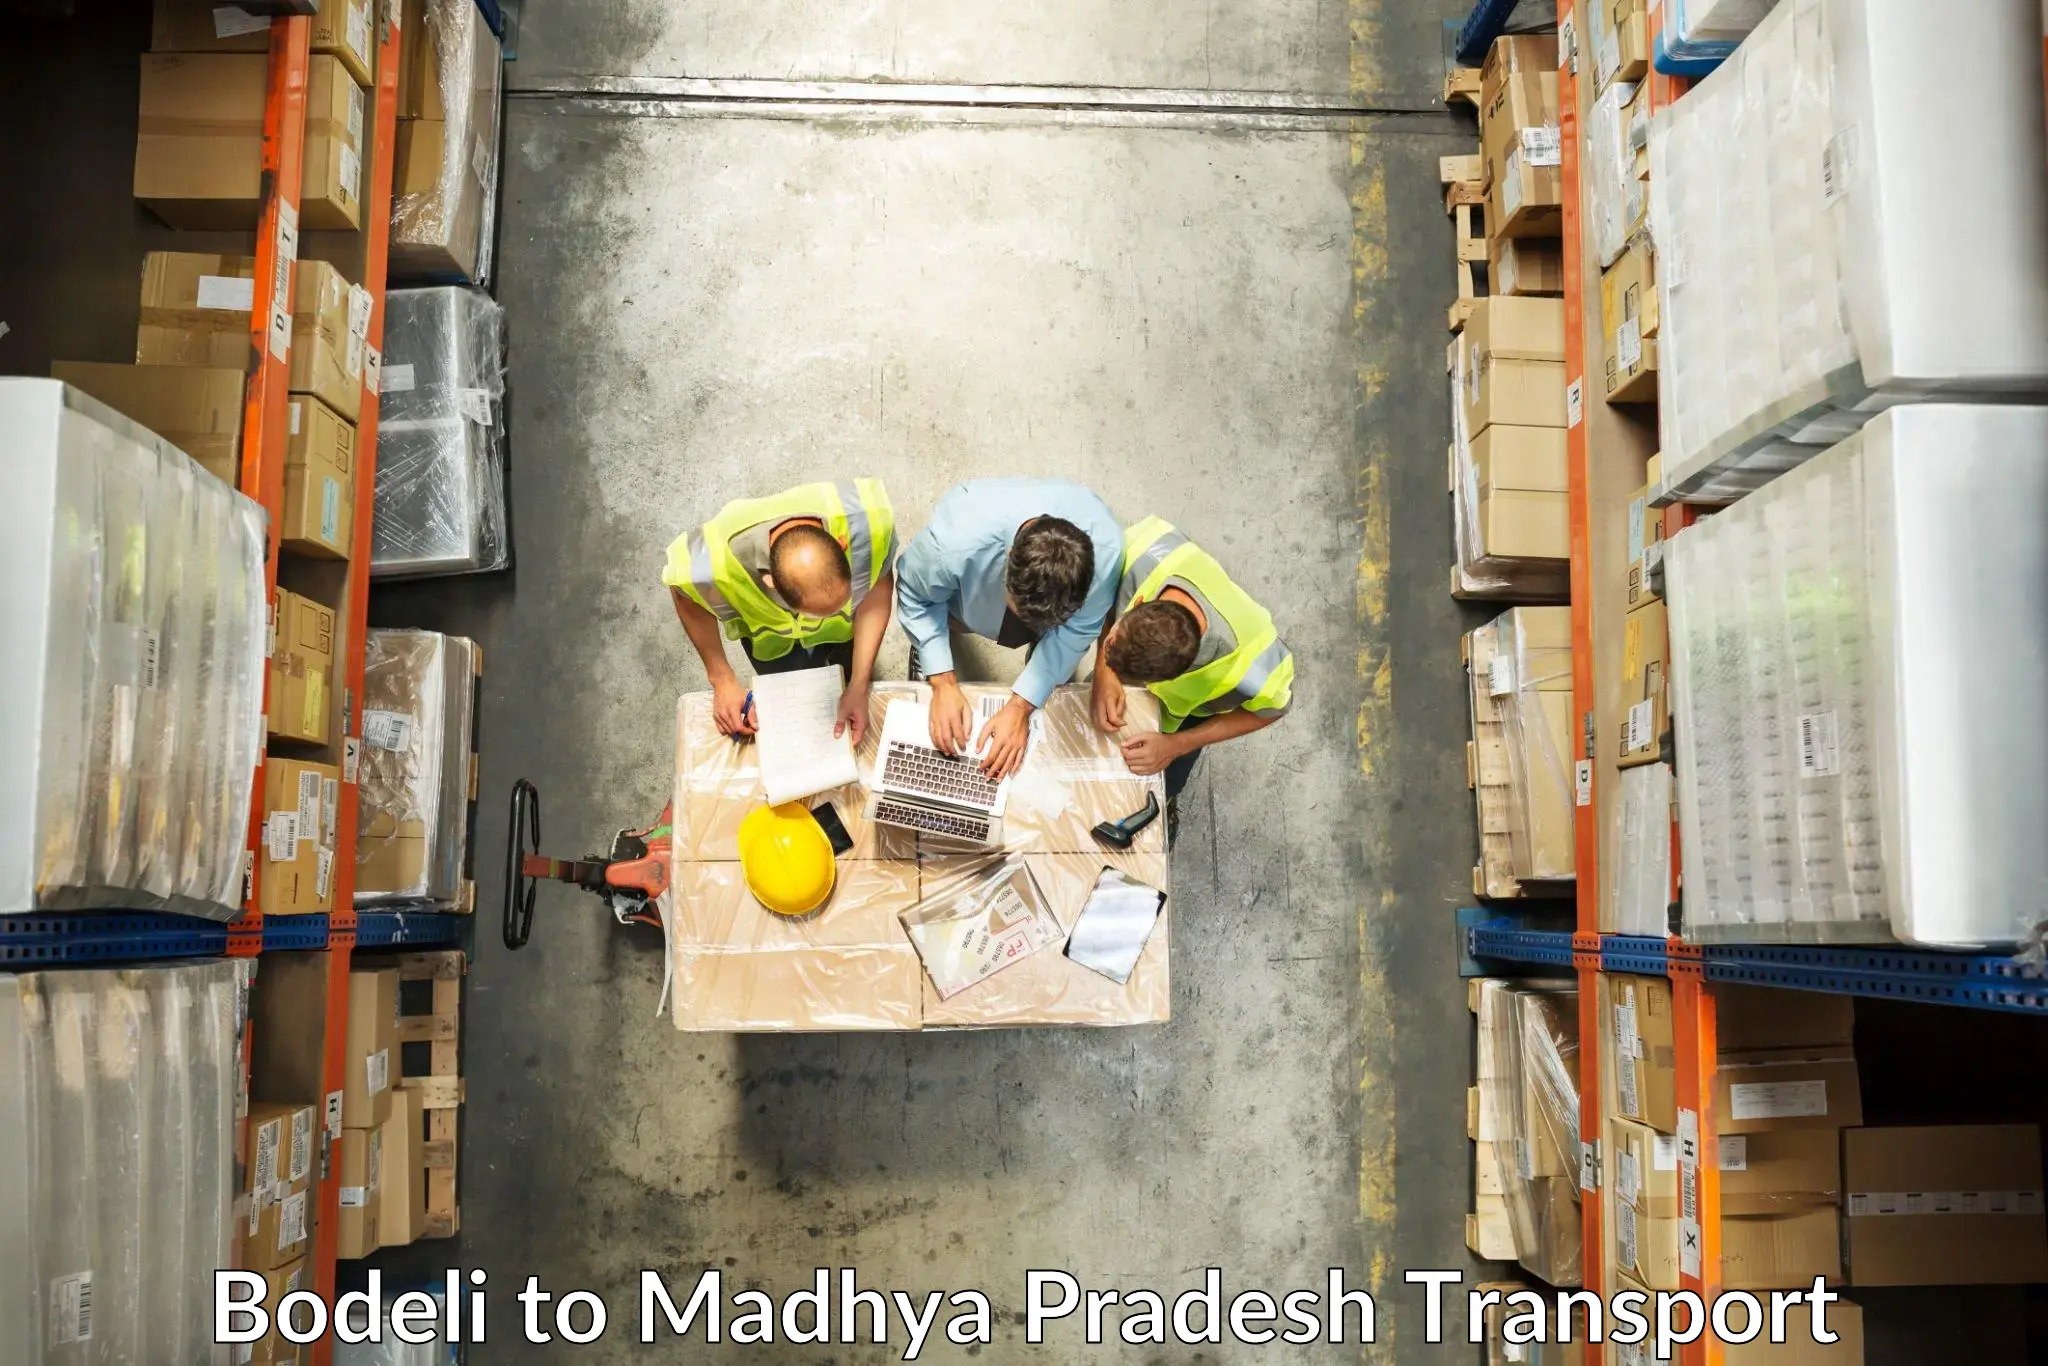 Shipping services Bodeli to IIIT Bhopal